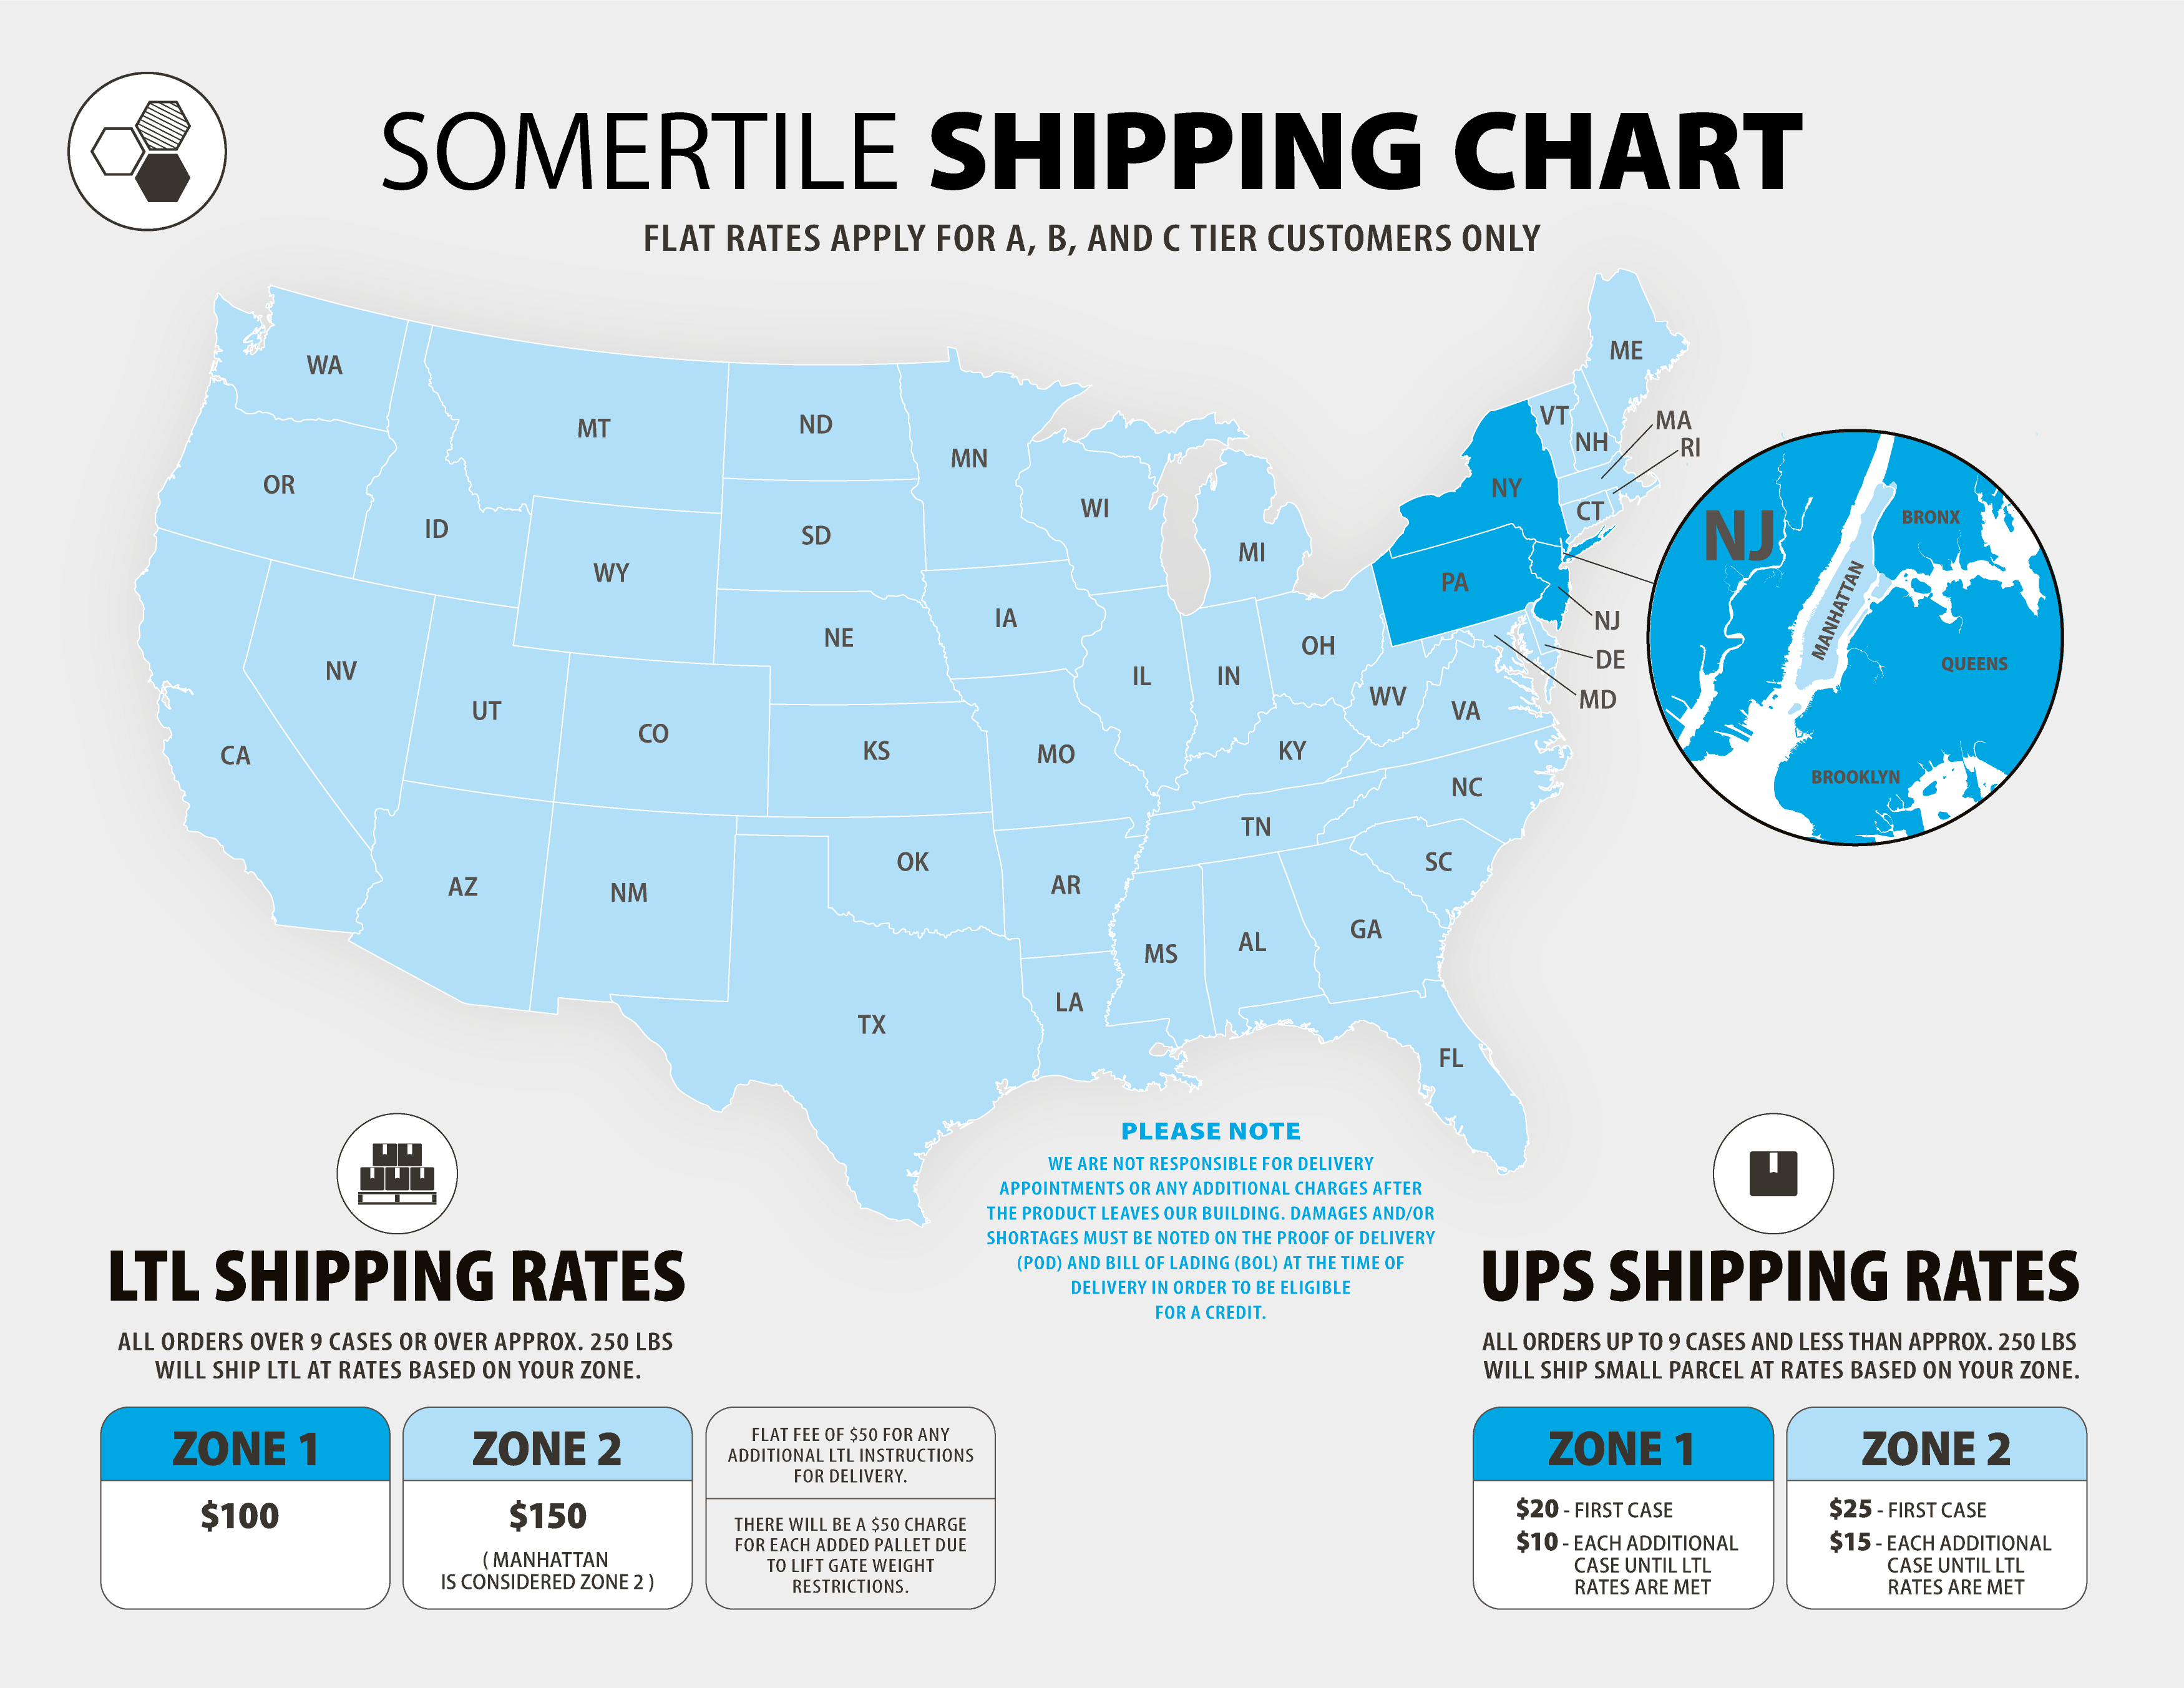 how much does it cost to ship flat rate?